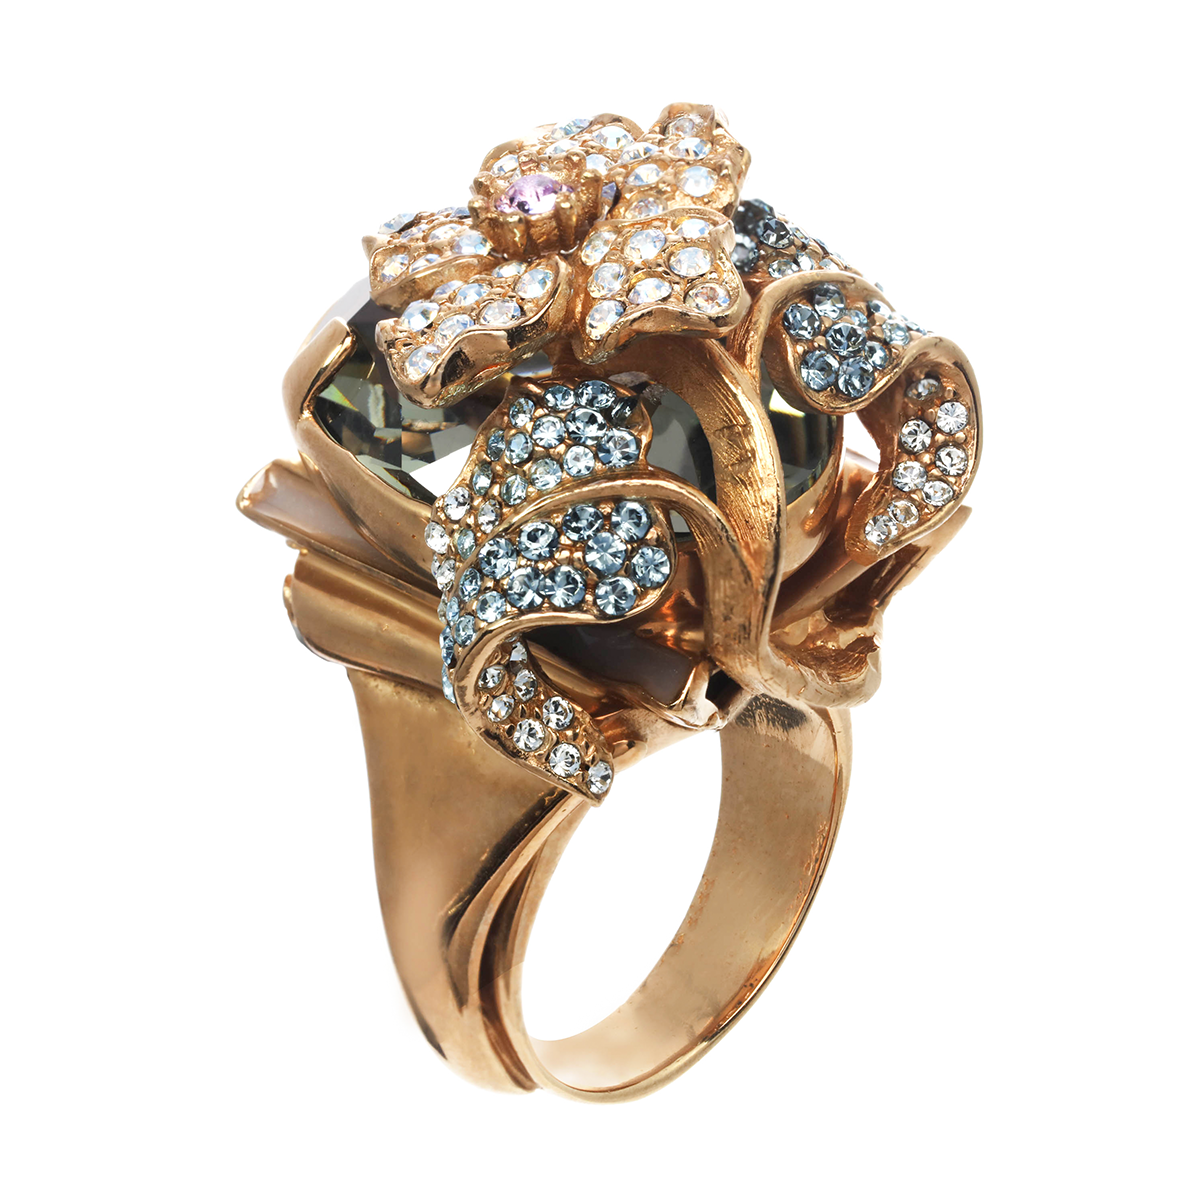 designer cocktail rings Price Starting From Rs 1,880. Find Verified Sellers  in Bareilly - JdMart